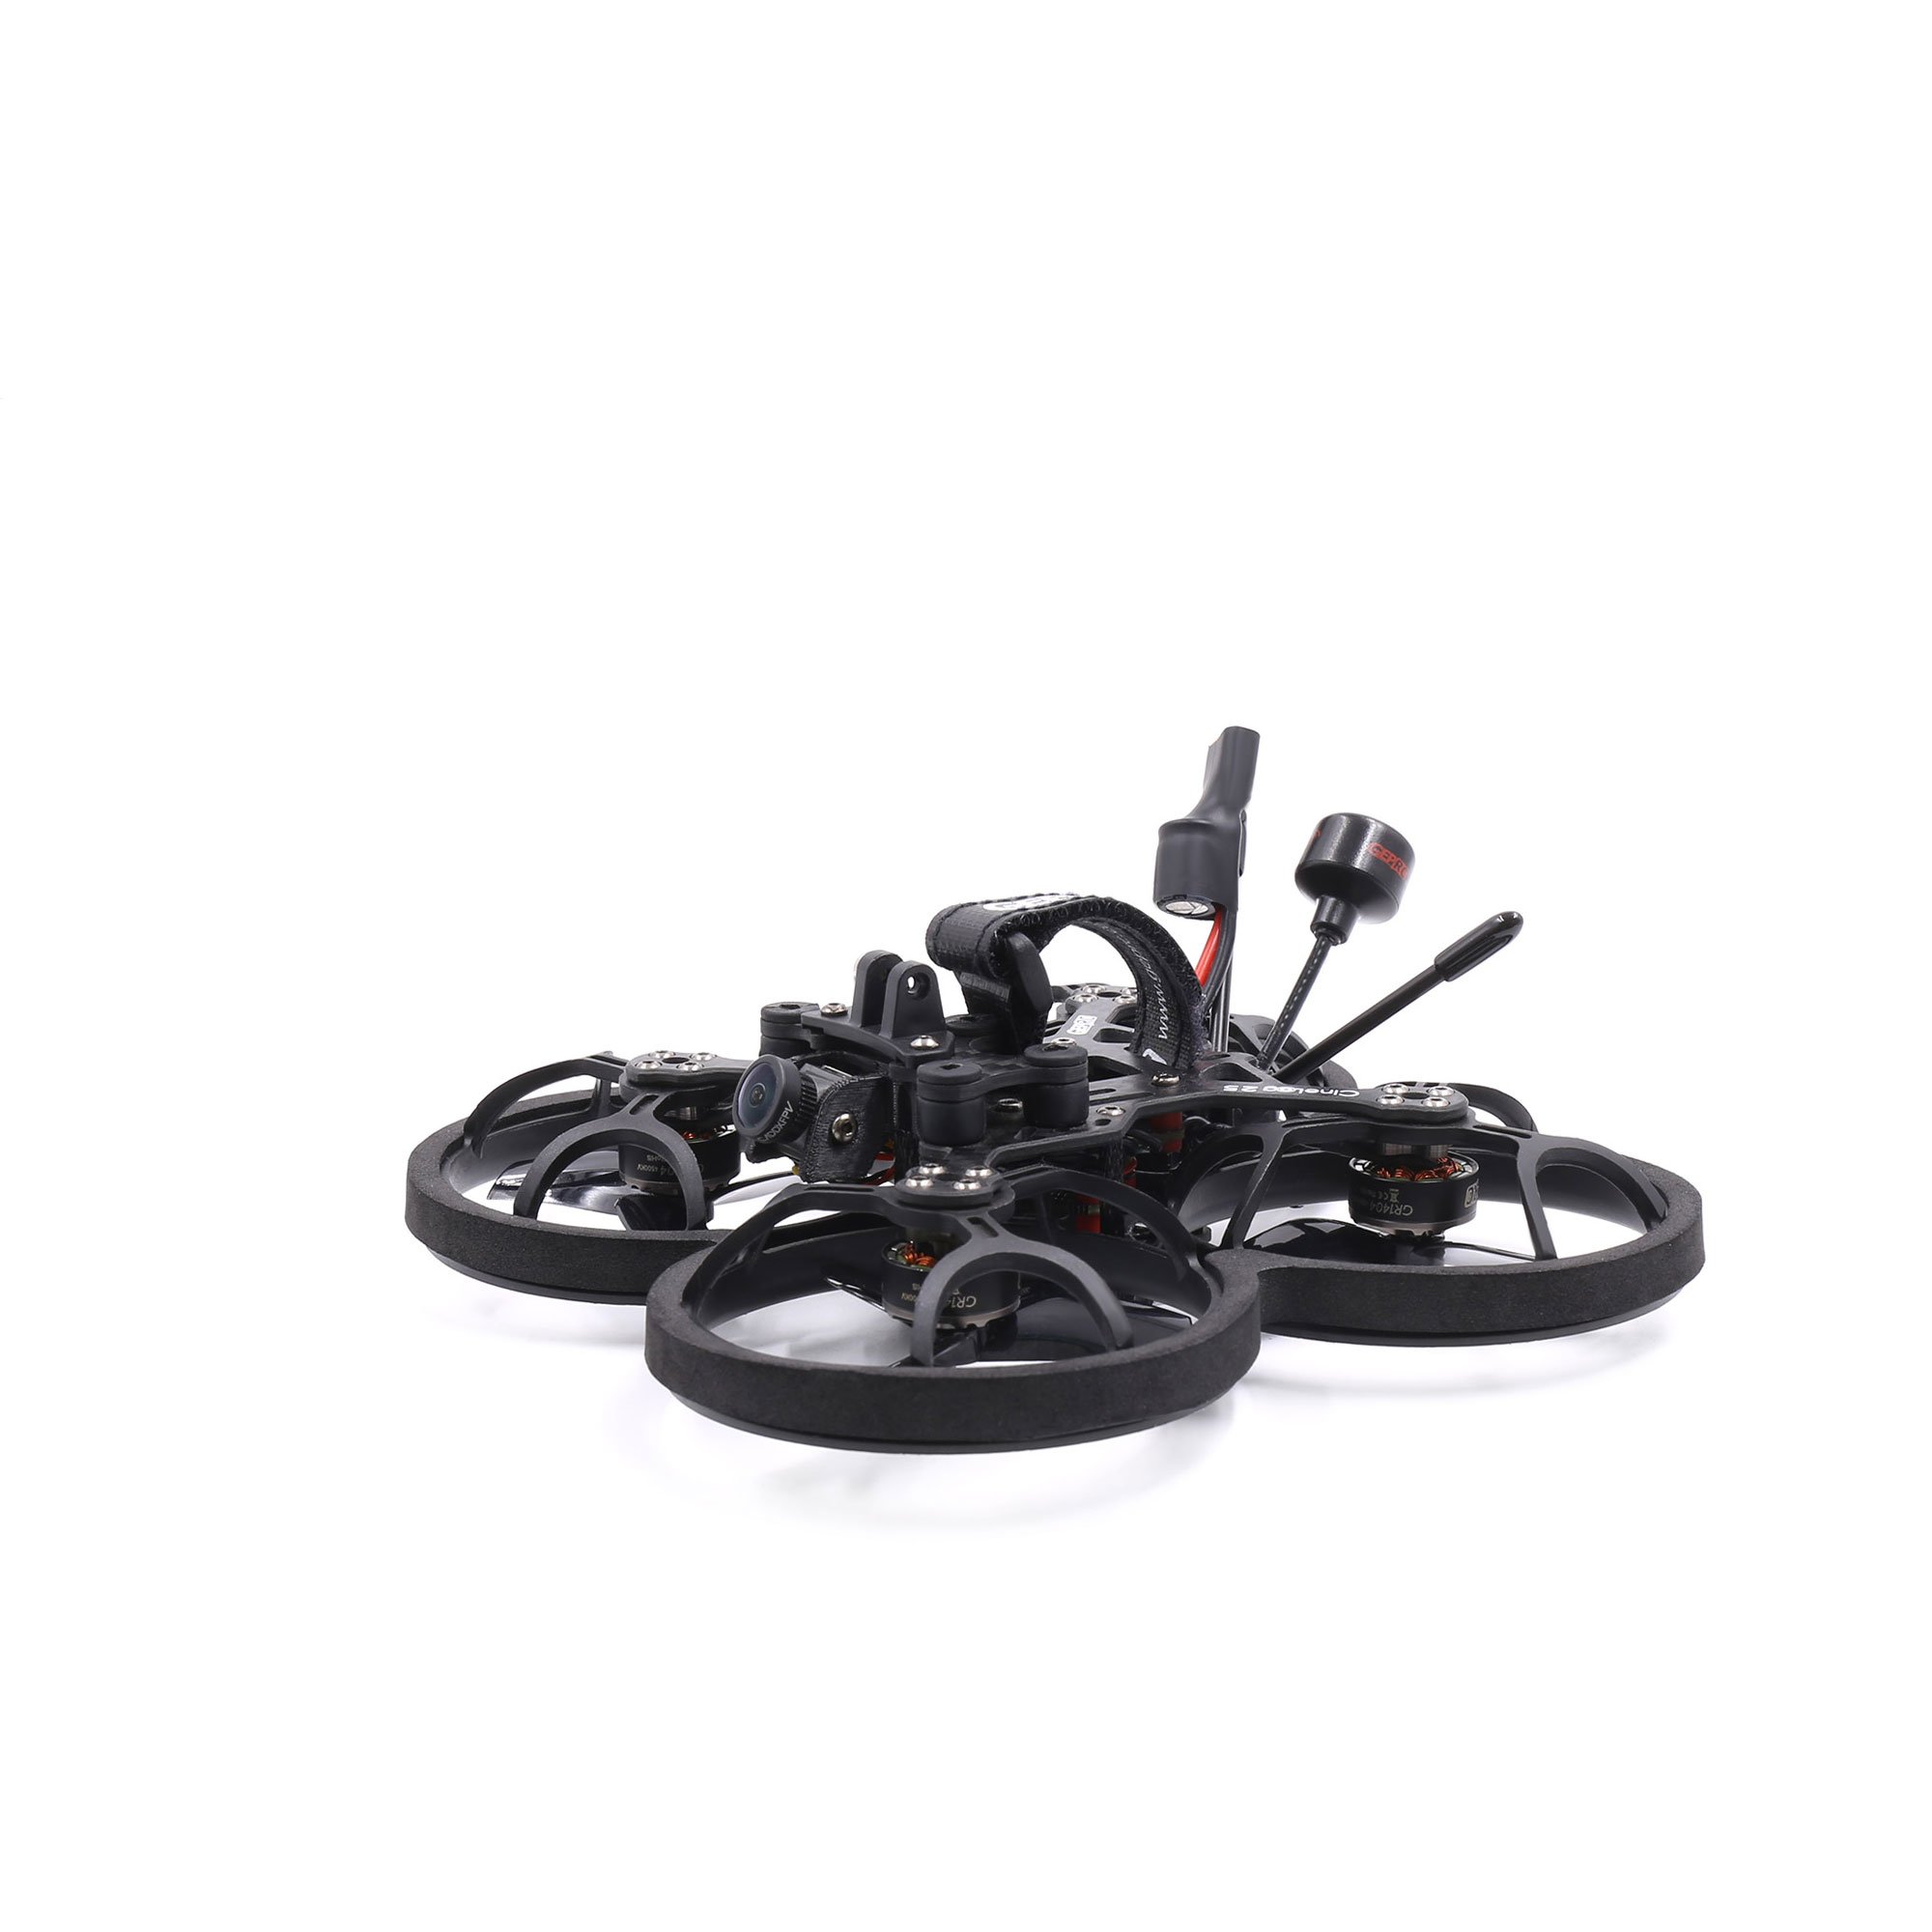 GEPRC CineLog25 CineWhoop FPV Drone 4S PNP(without receiver) 完成機